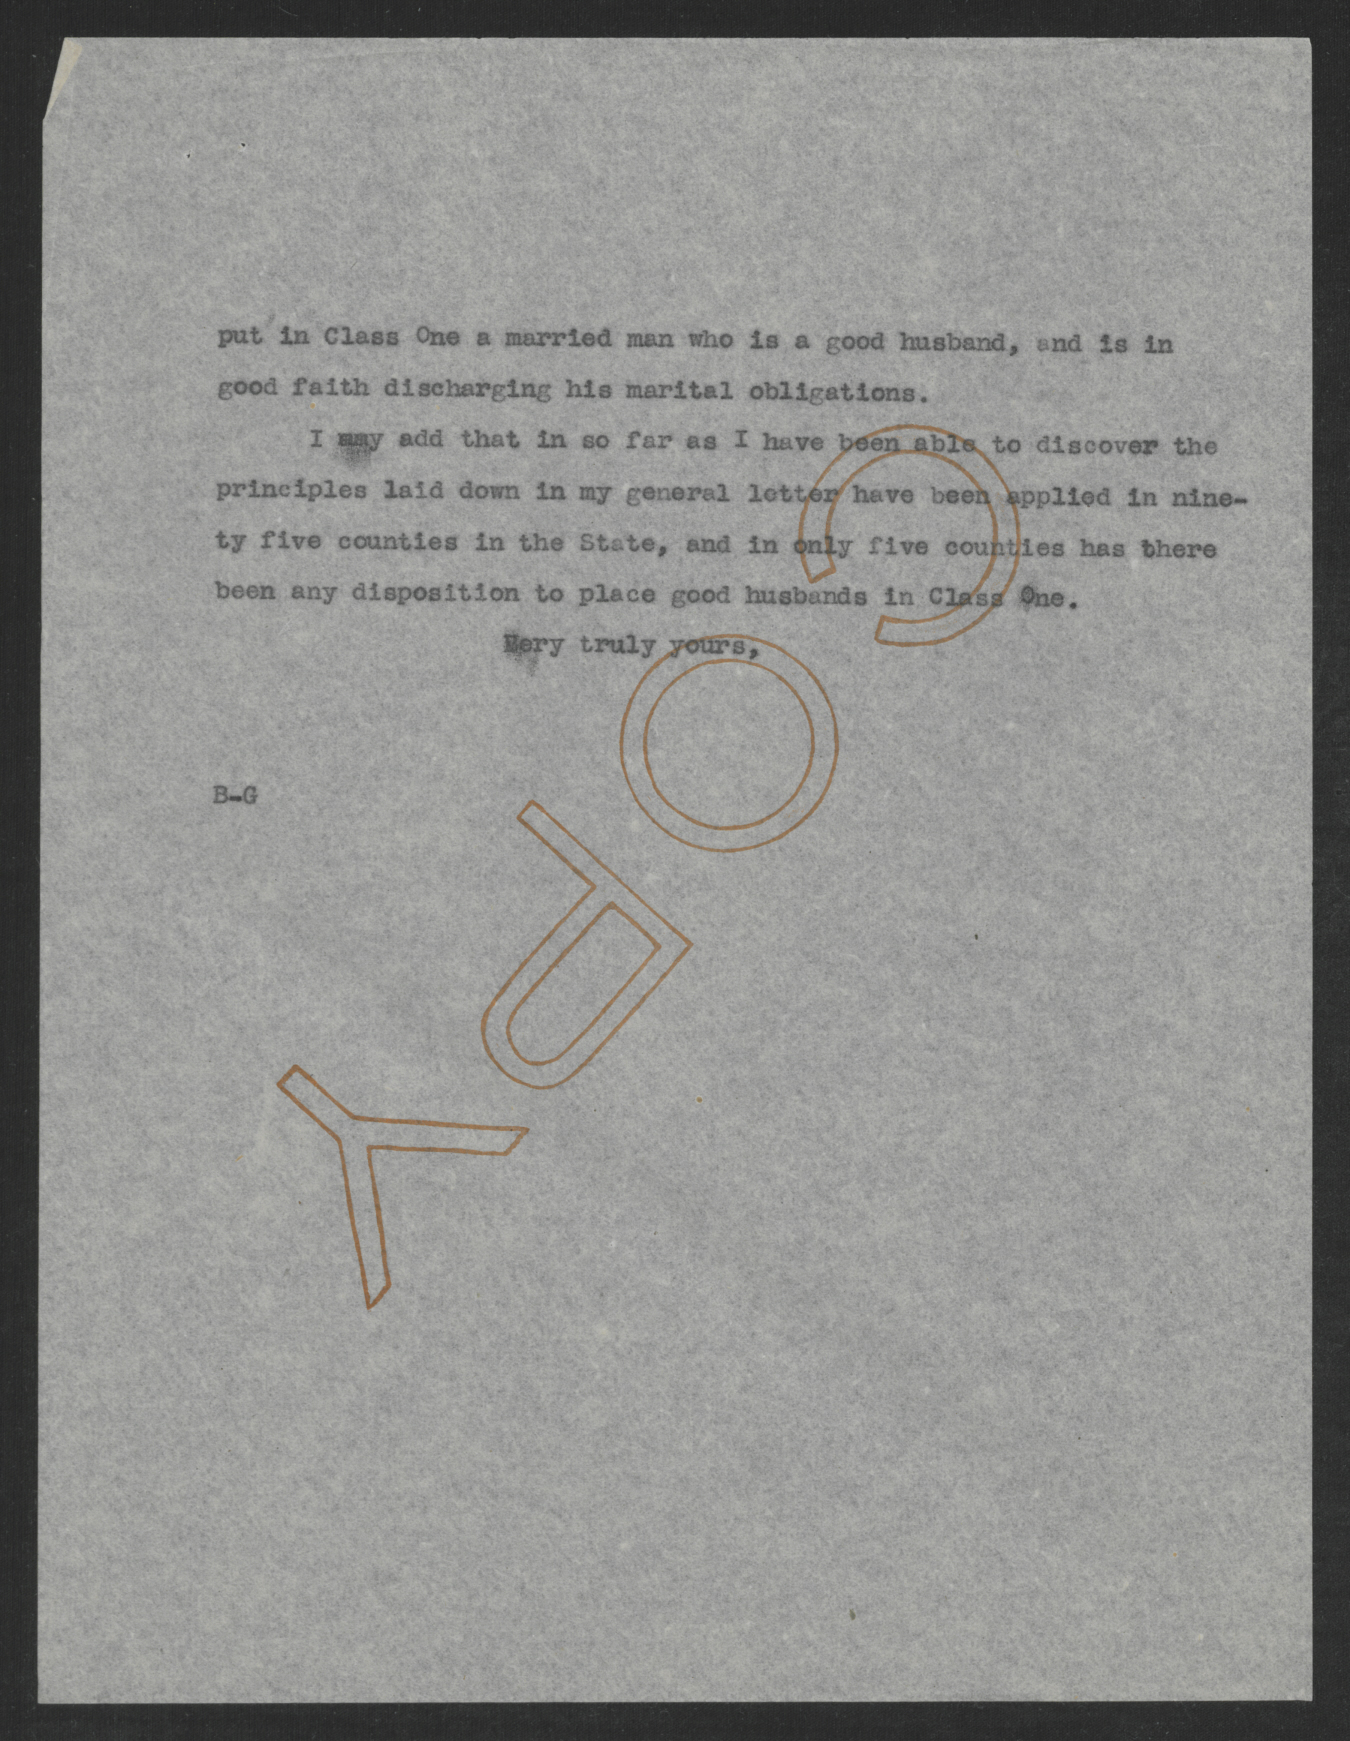 Letter from Thomas W. Bickett to the Edgecombe County Exemption Board, February 16, 1918, page 2